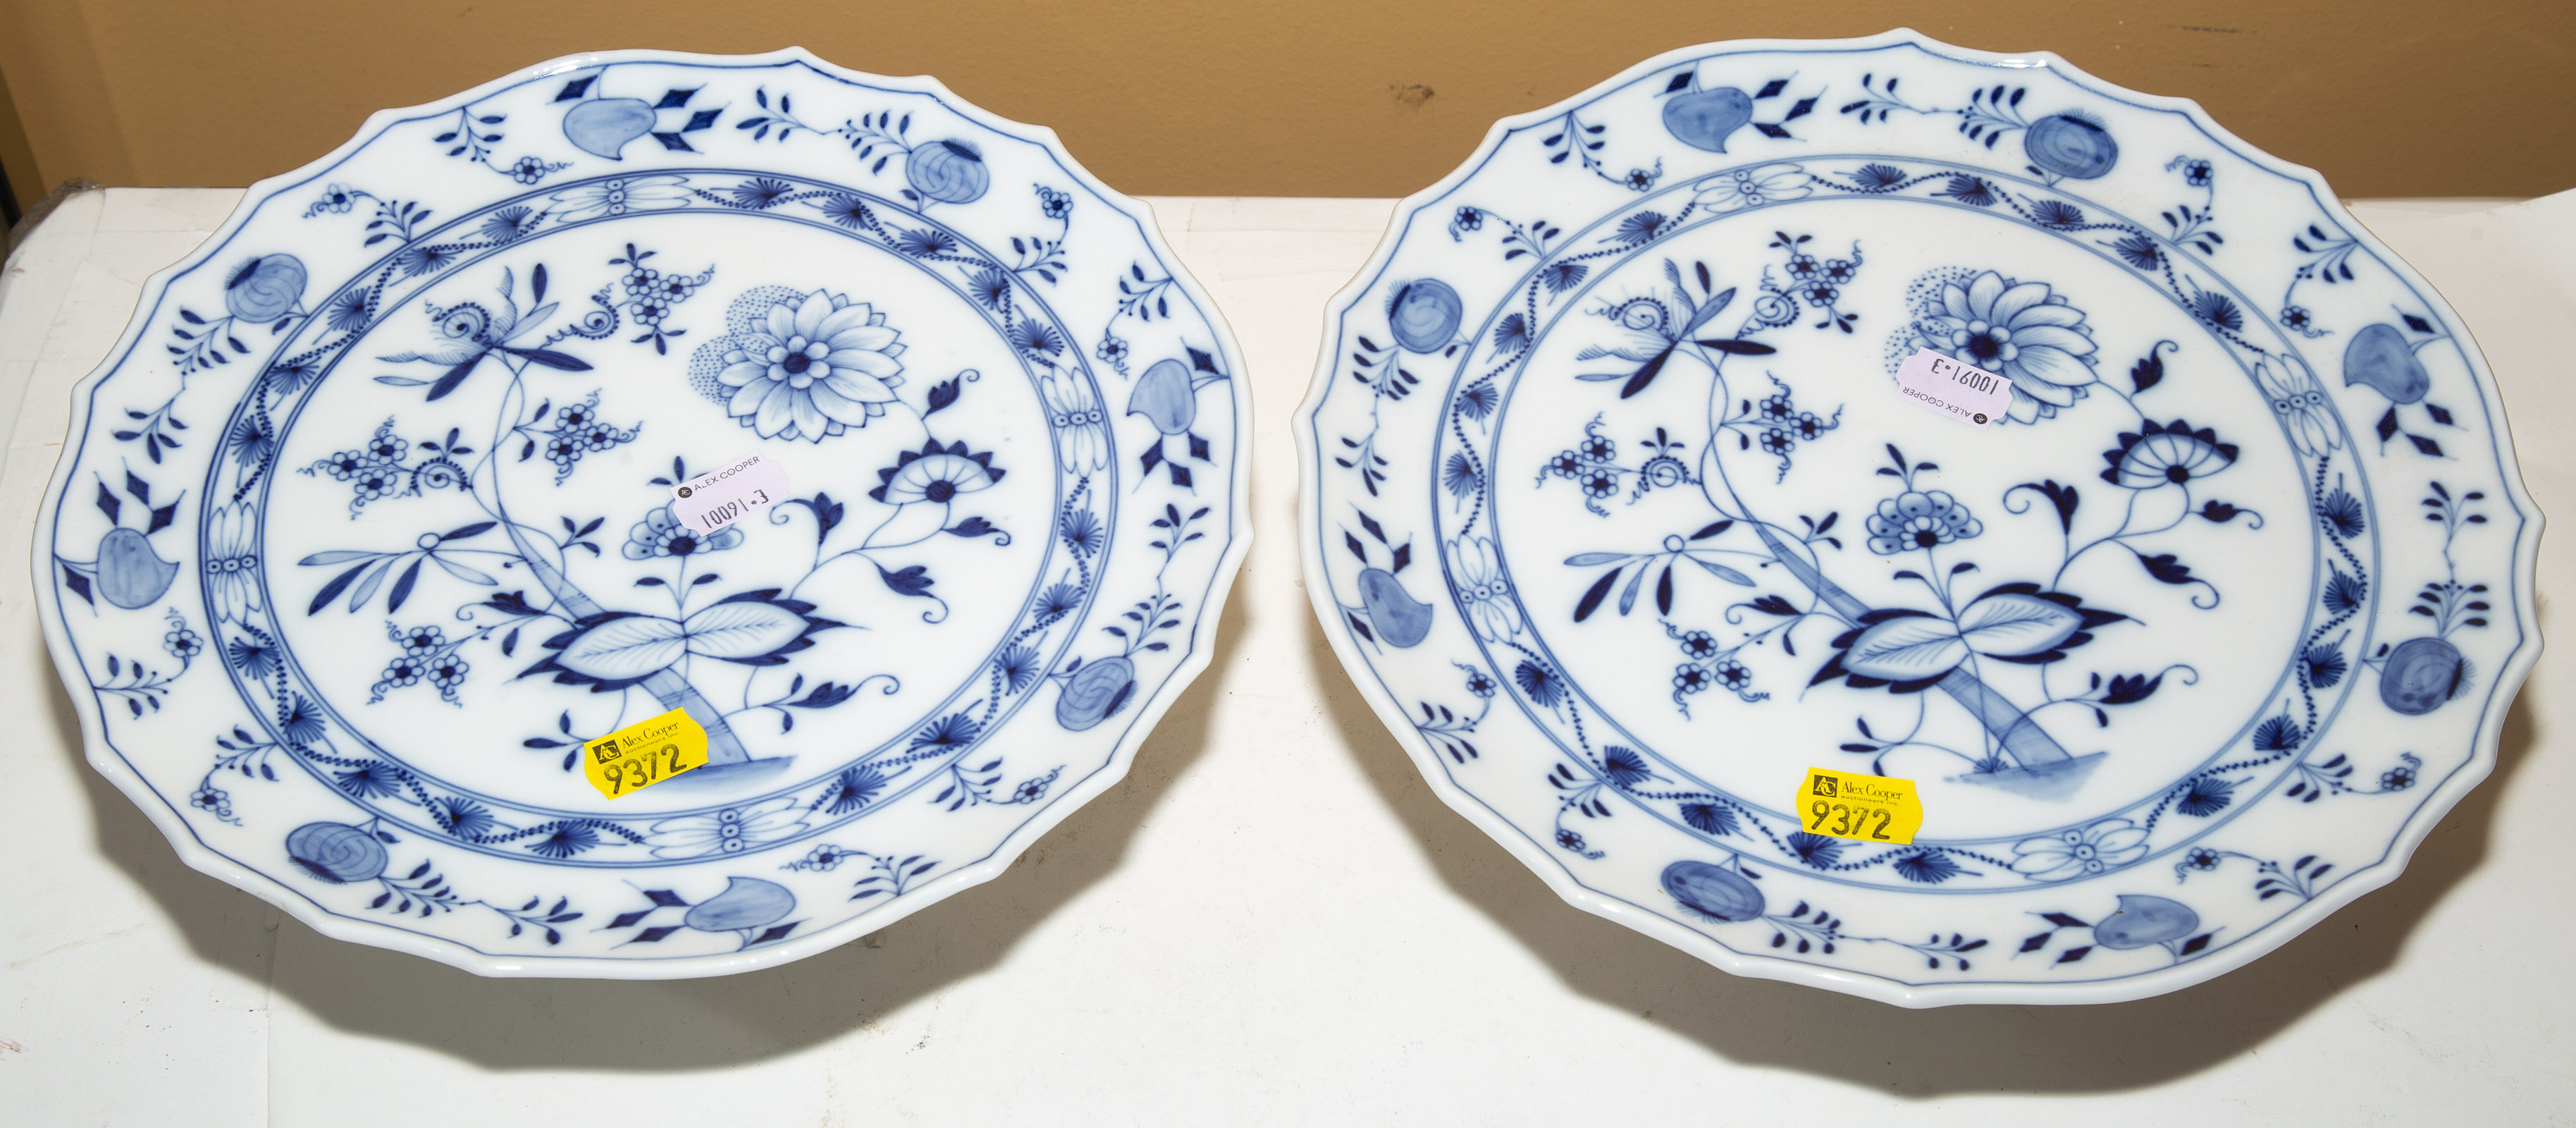 TWO GERMAN BLUE ONION CAKE STANDS